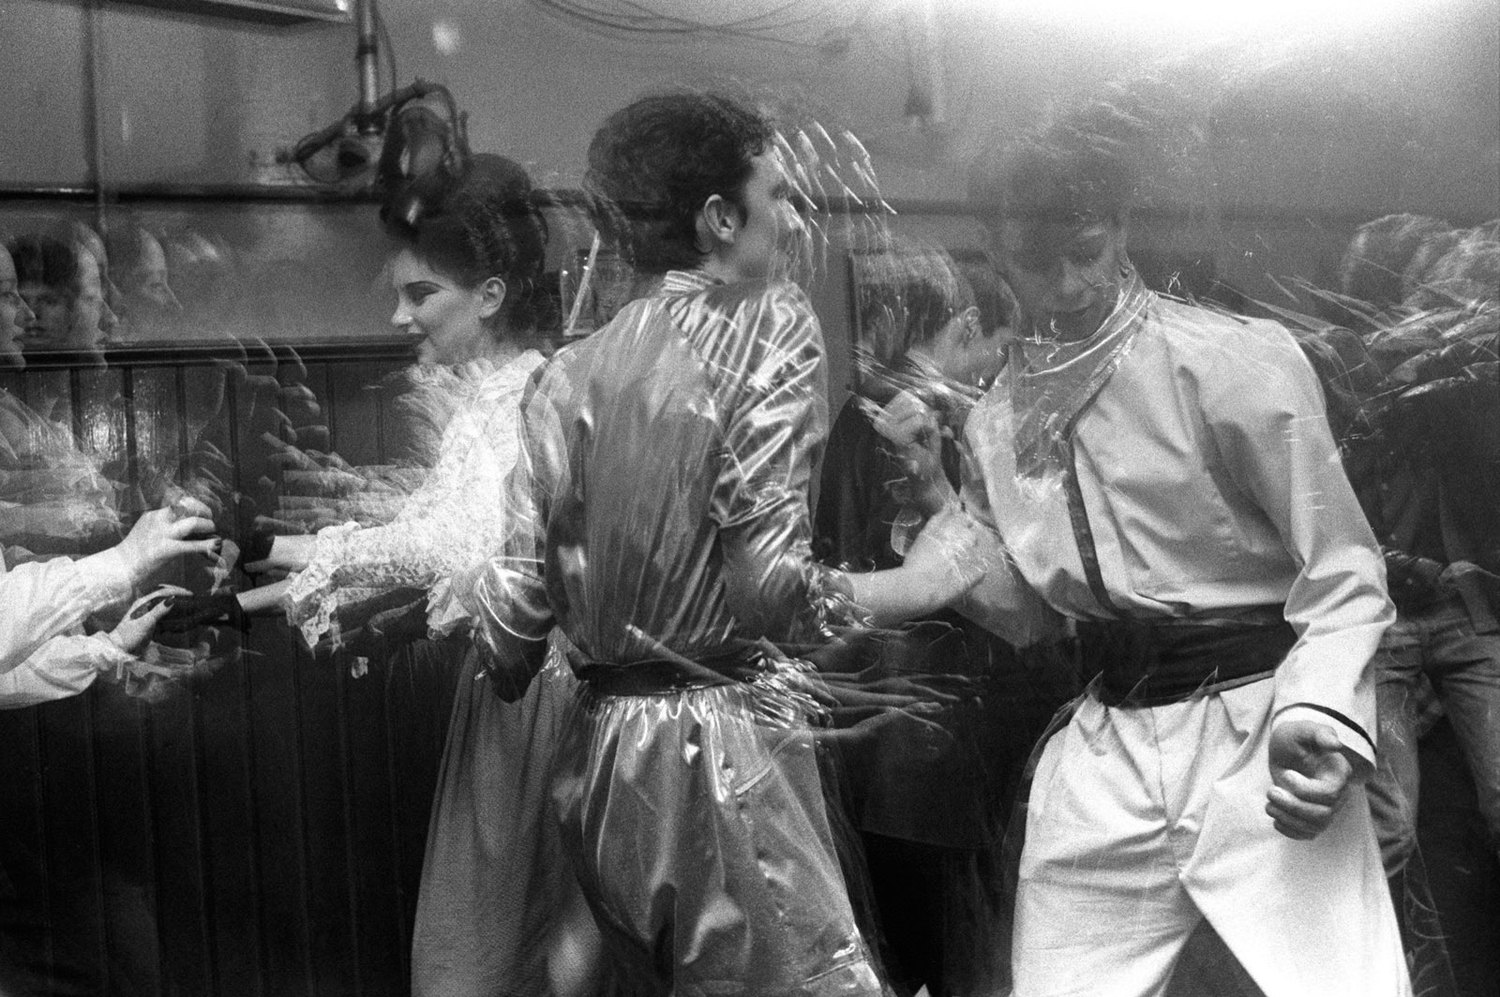 Space Cadets at the Blitz Club, Covent Garden, London, 1980